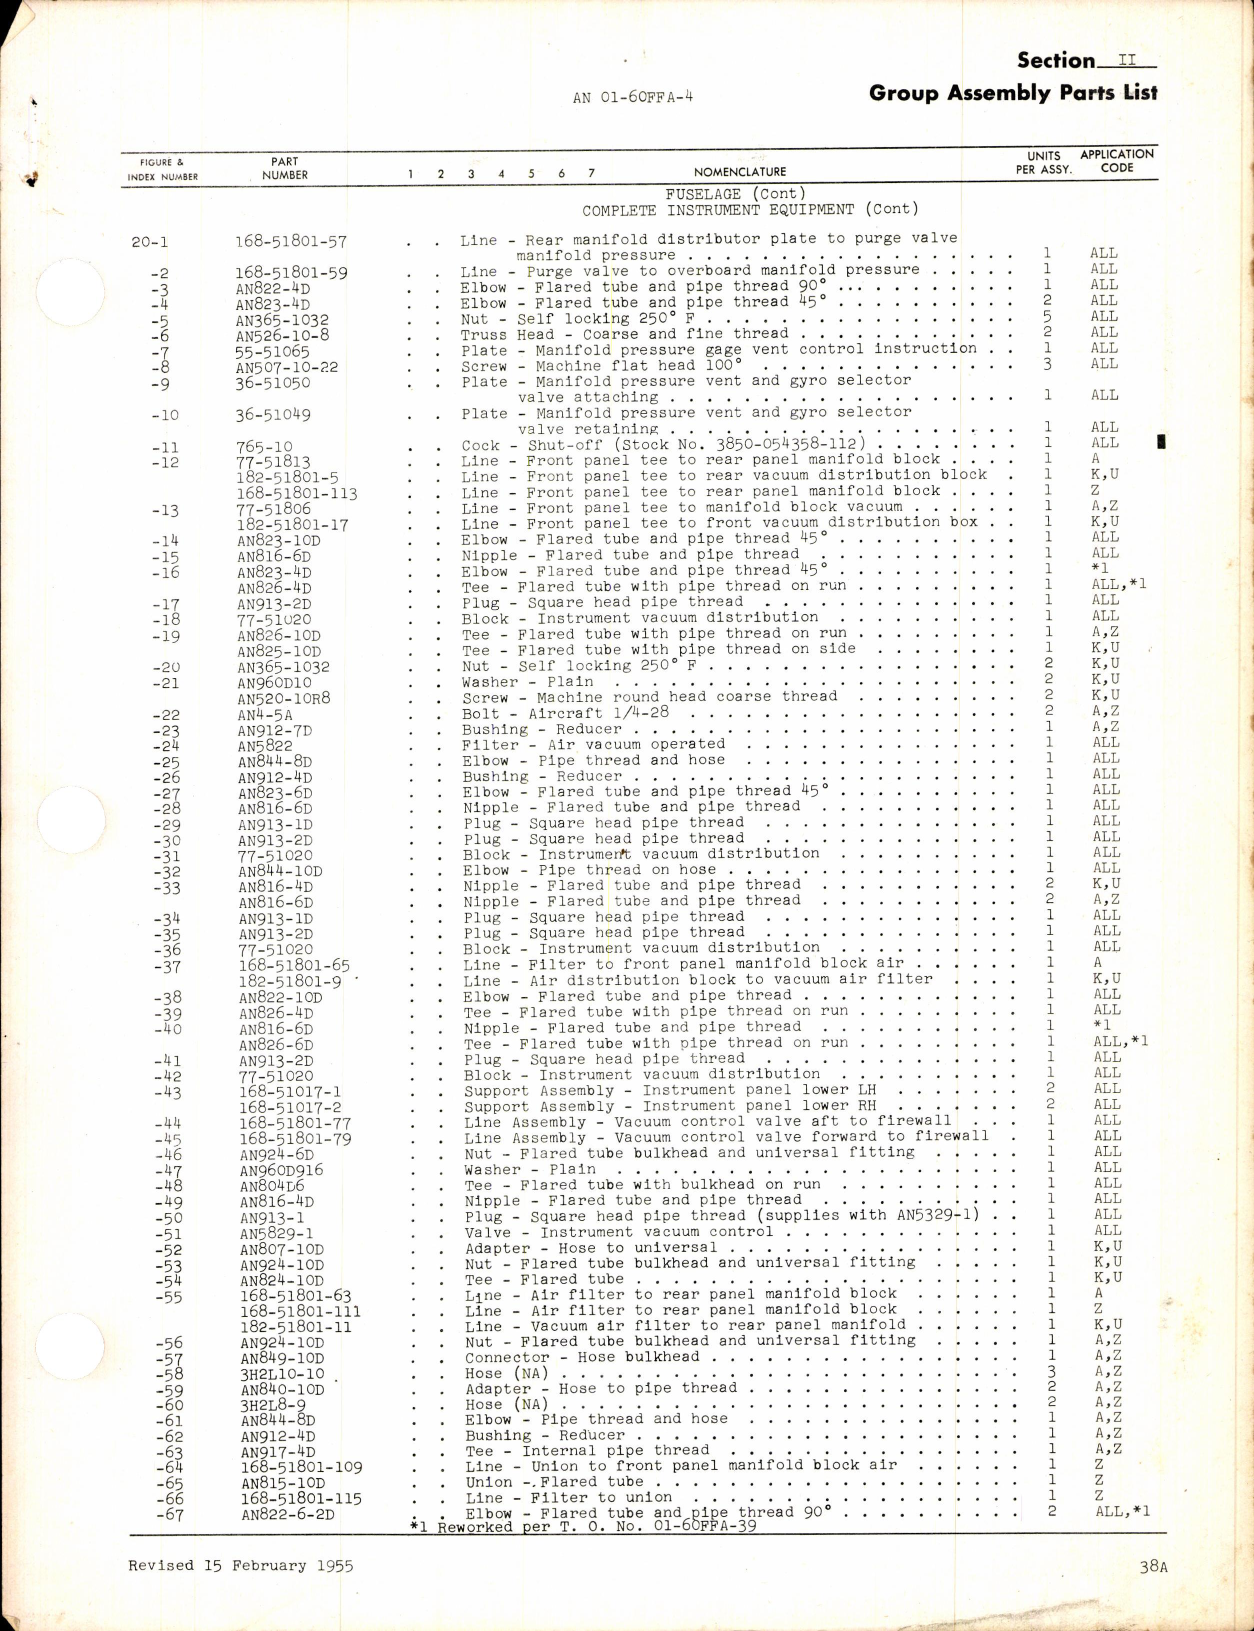 Sample page 3 from AirCorps Library document: Parts Catalog for T-6G and LT-6G Aircraft